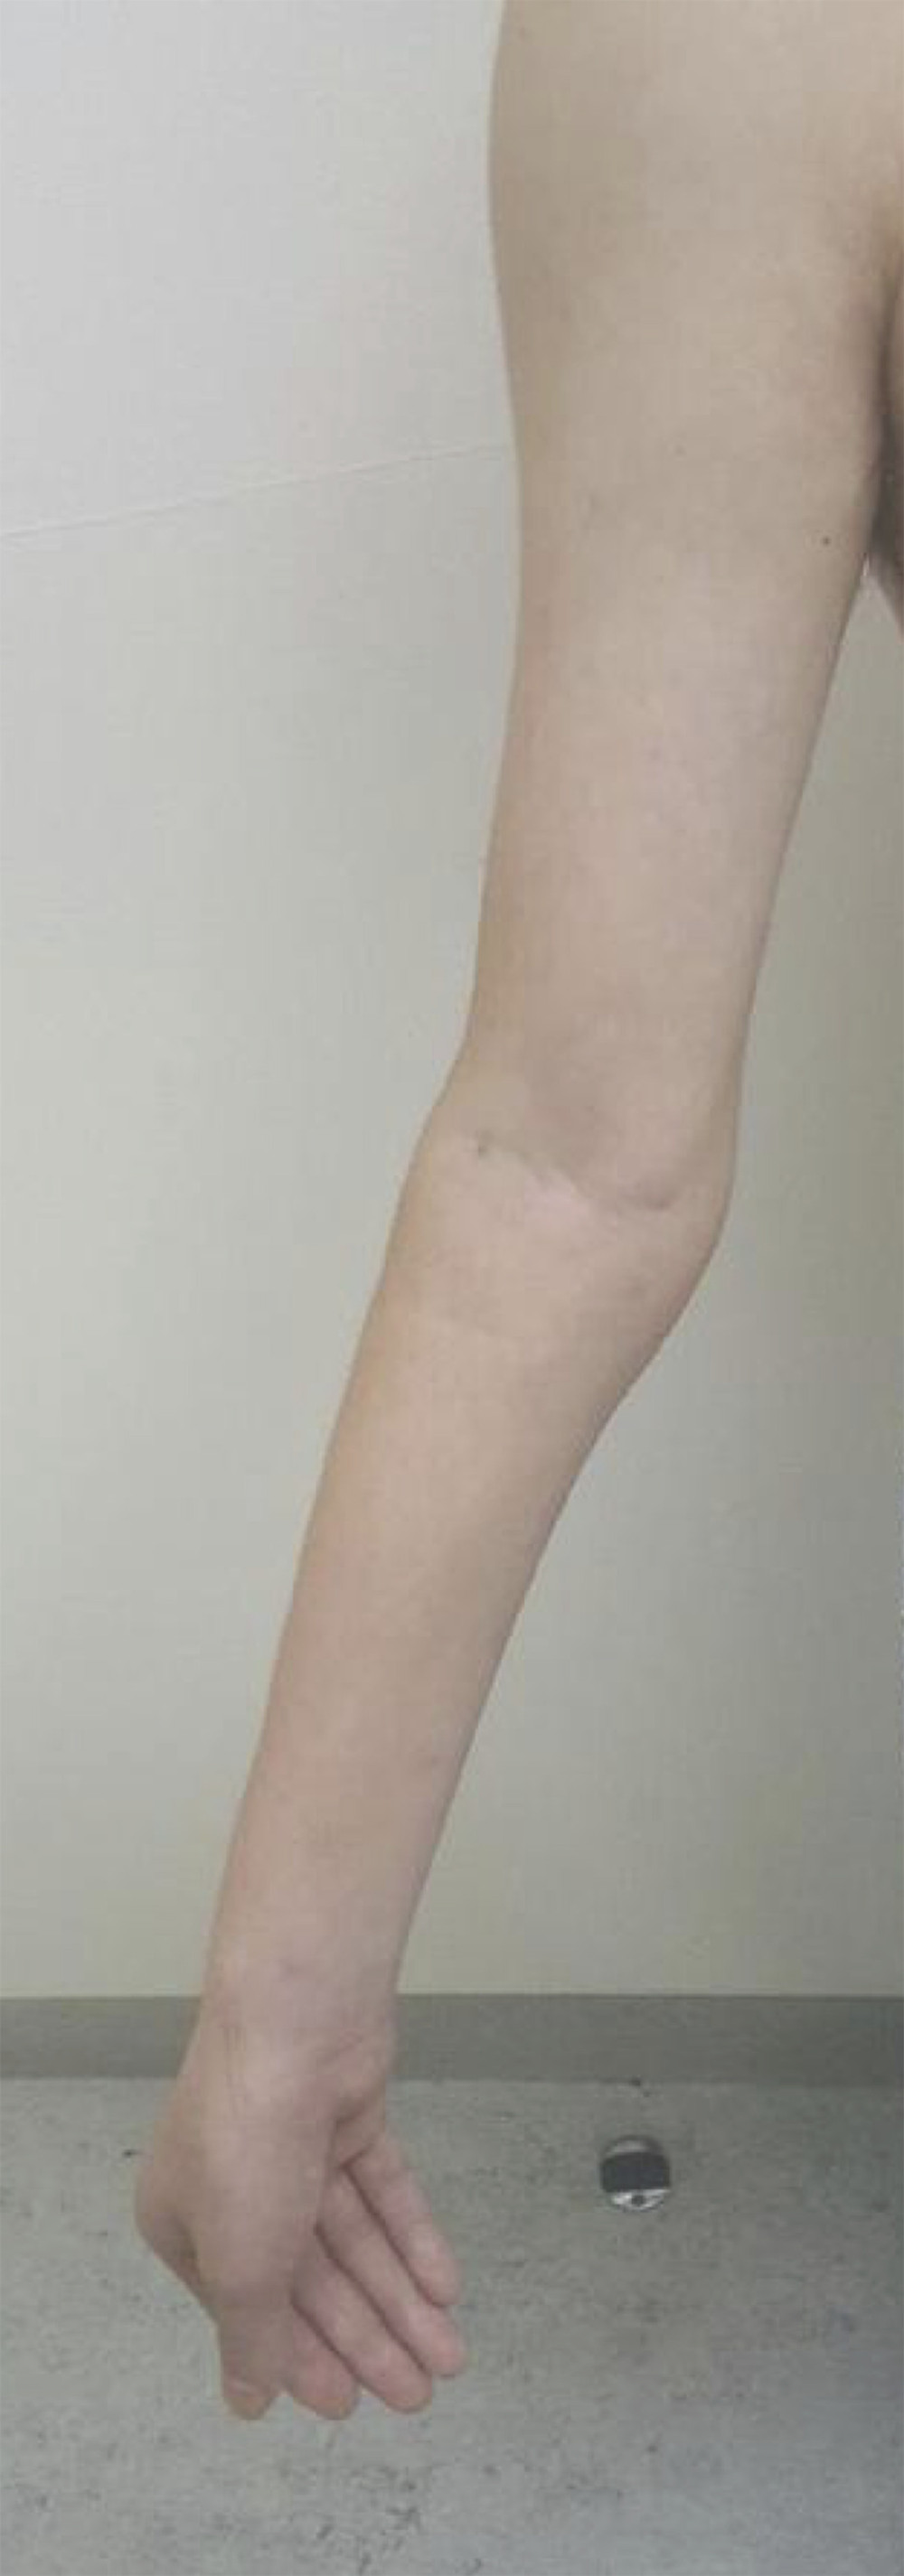 Clinical features of the patient. Distal muscle atrophy was noted in the upper extremity.